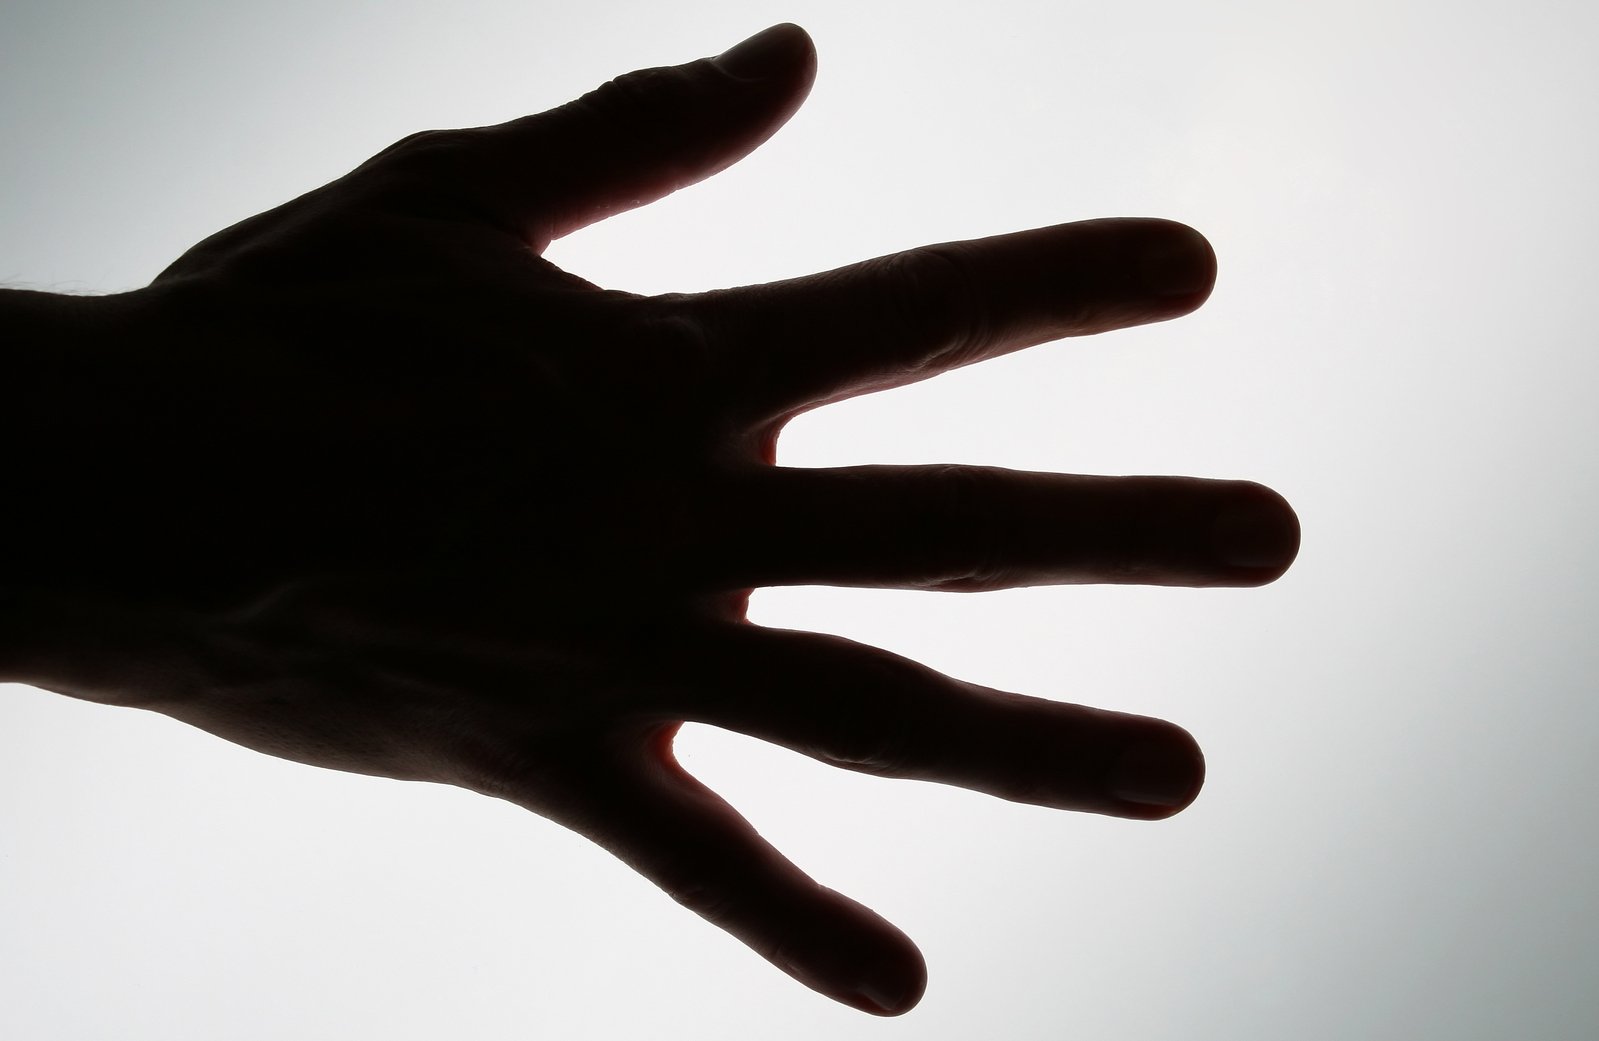 a hand with no fingers is seen silhouetted against the sky